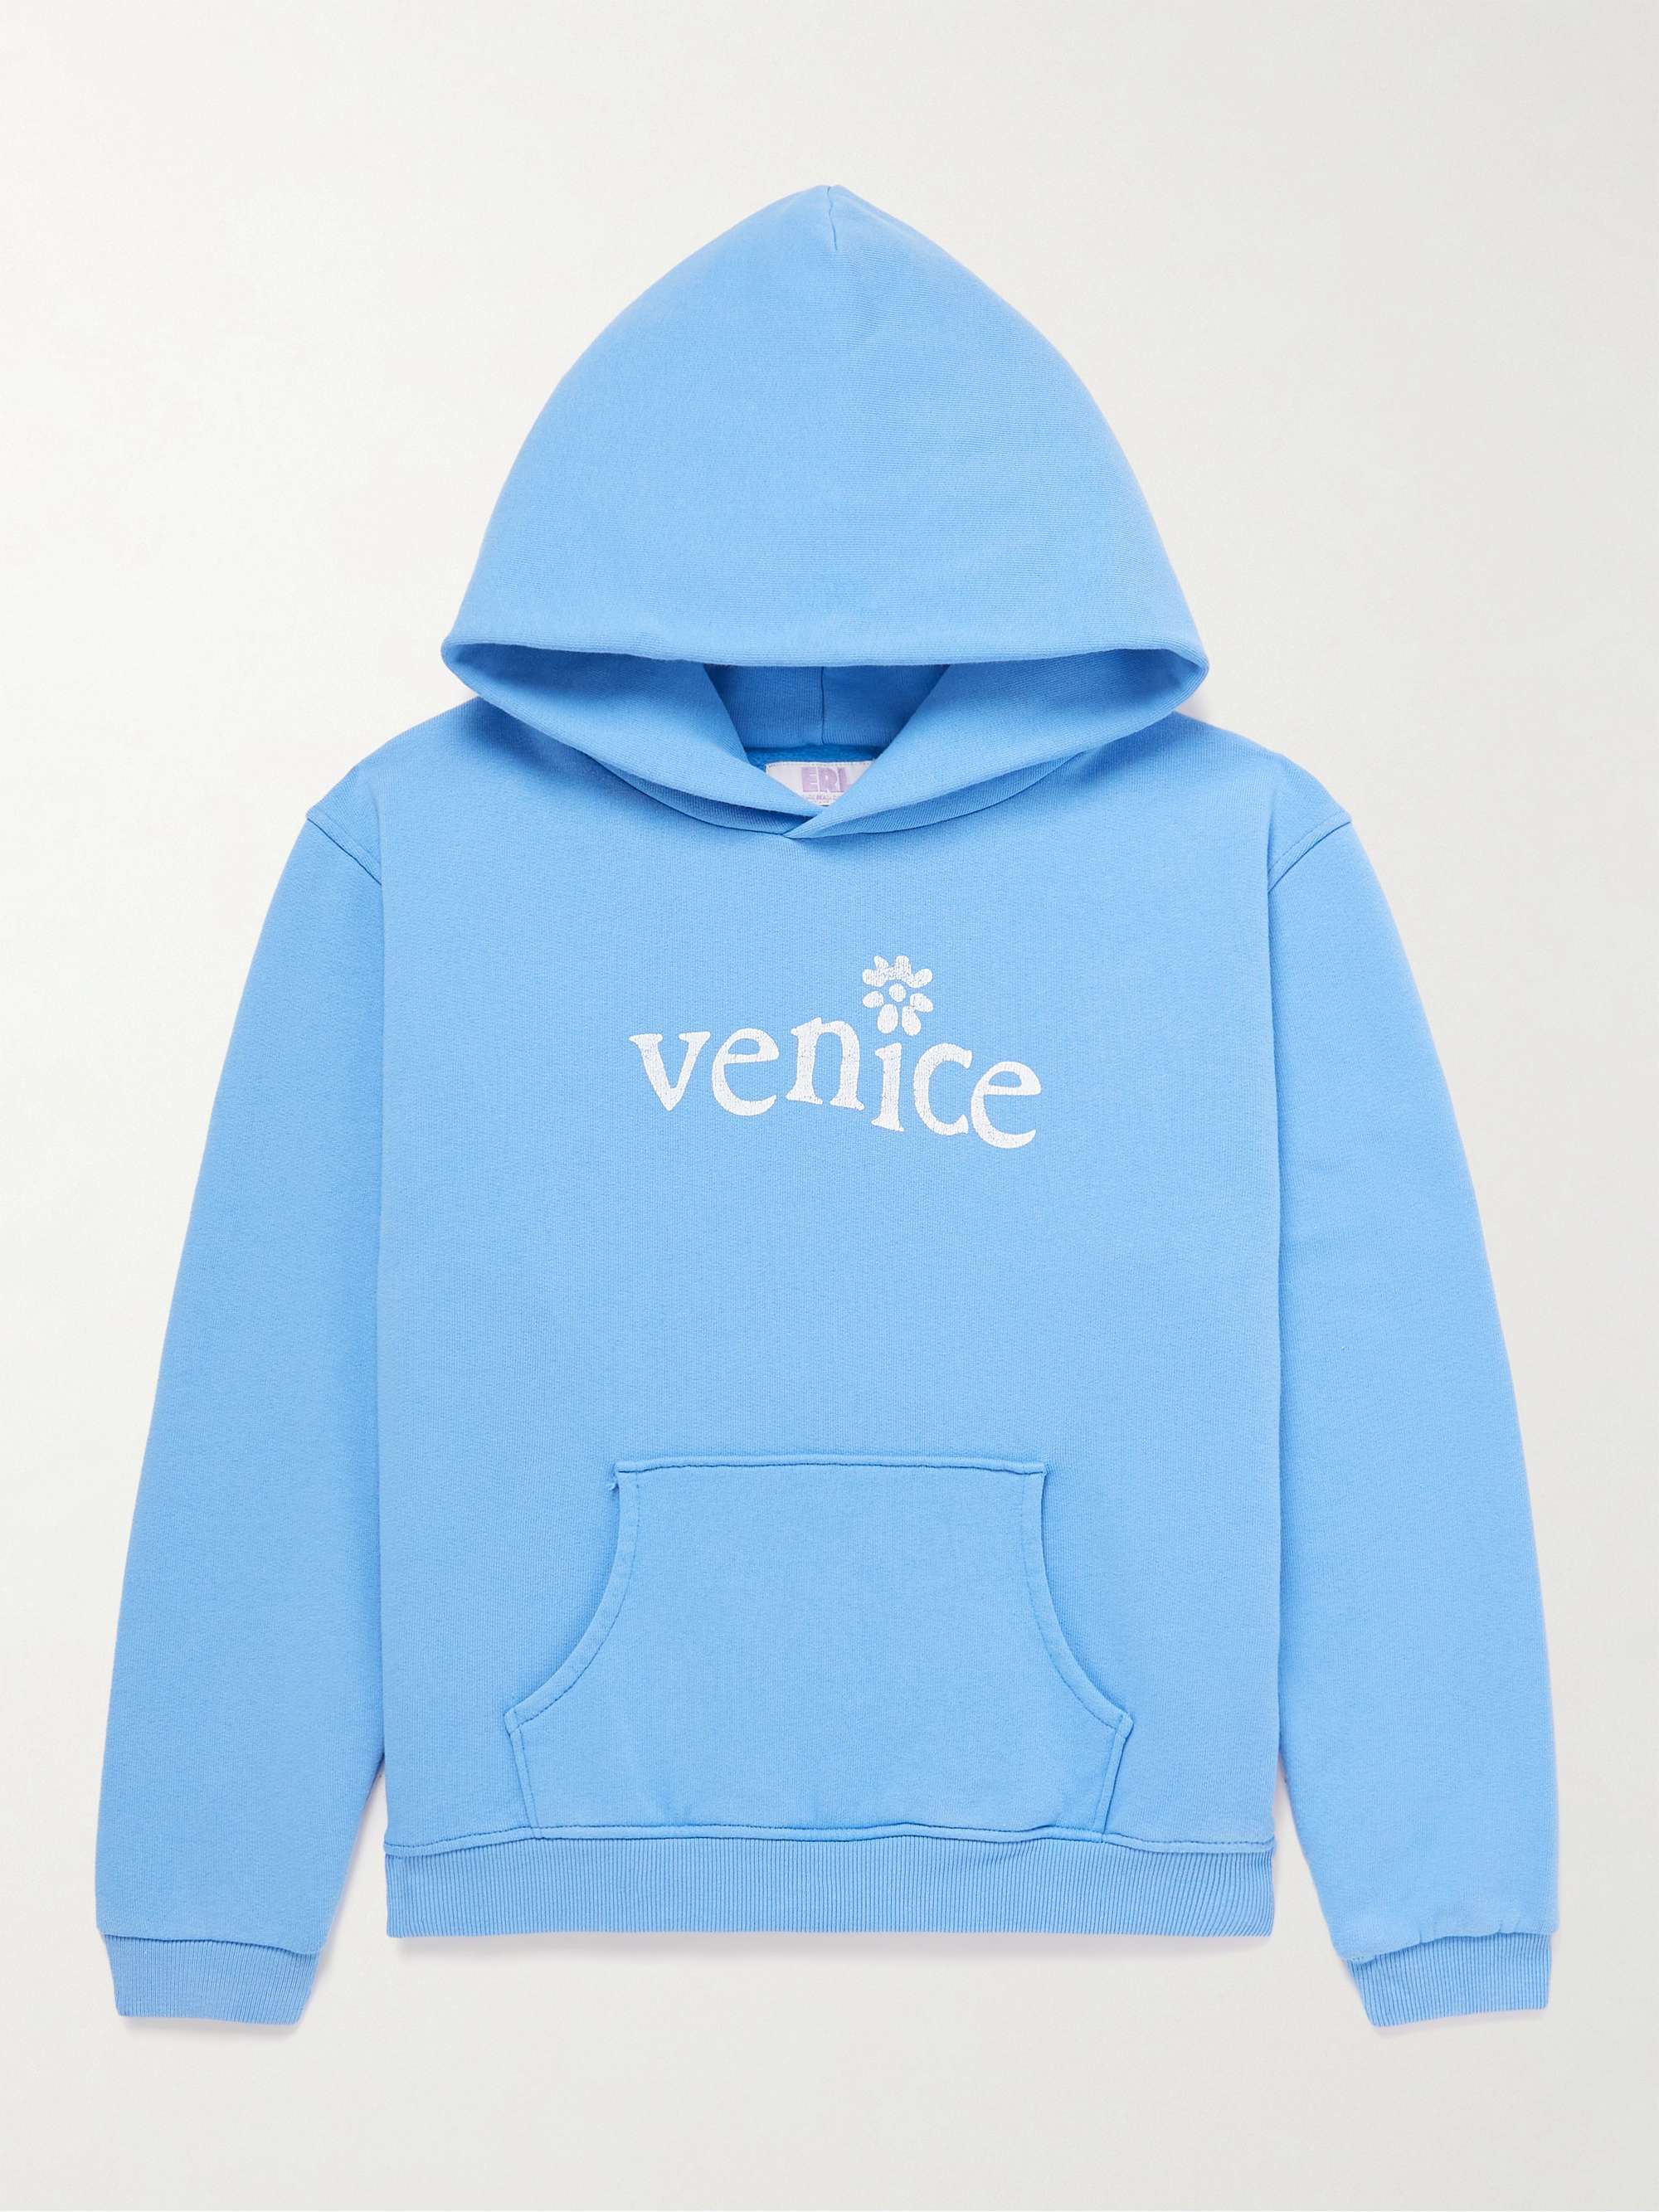 Venice Printed Cotton-Blend Jersey Hoodie